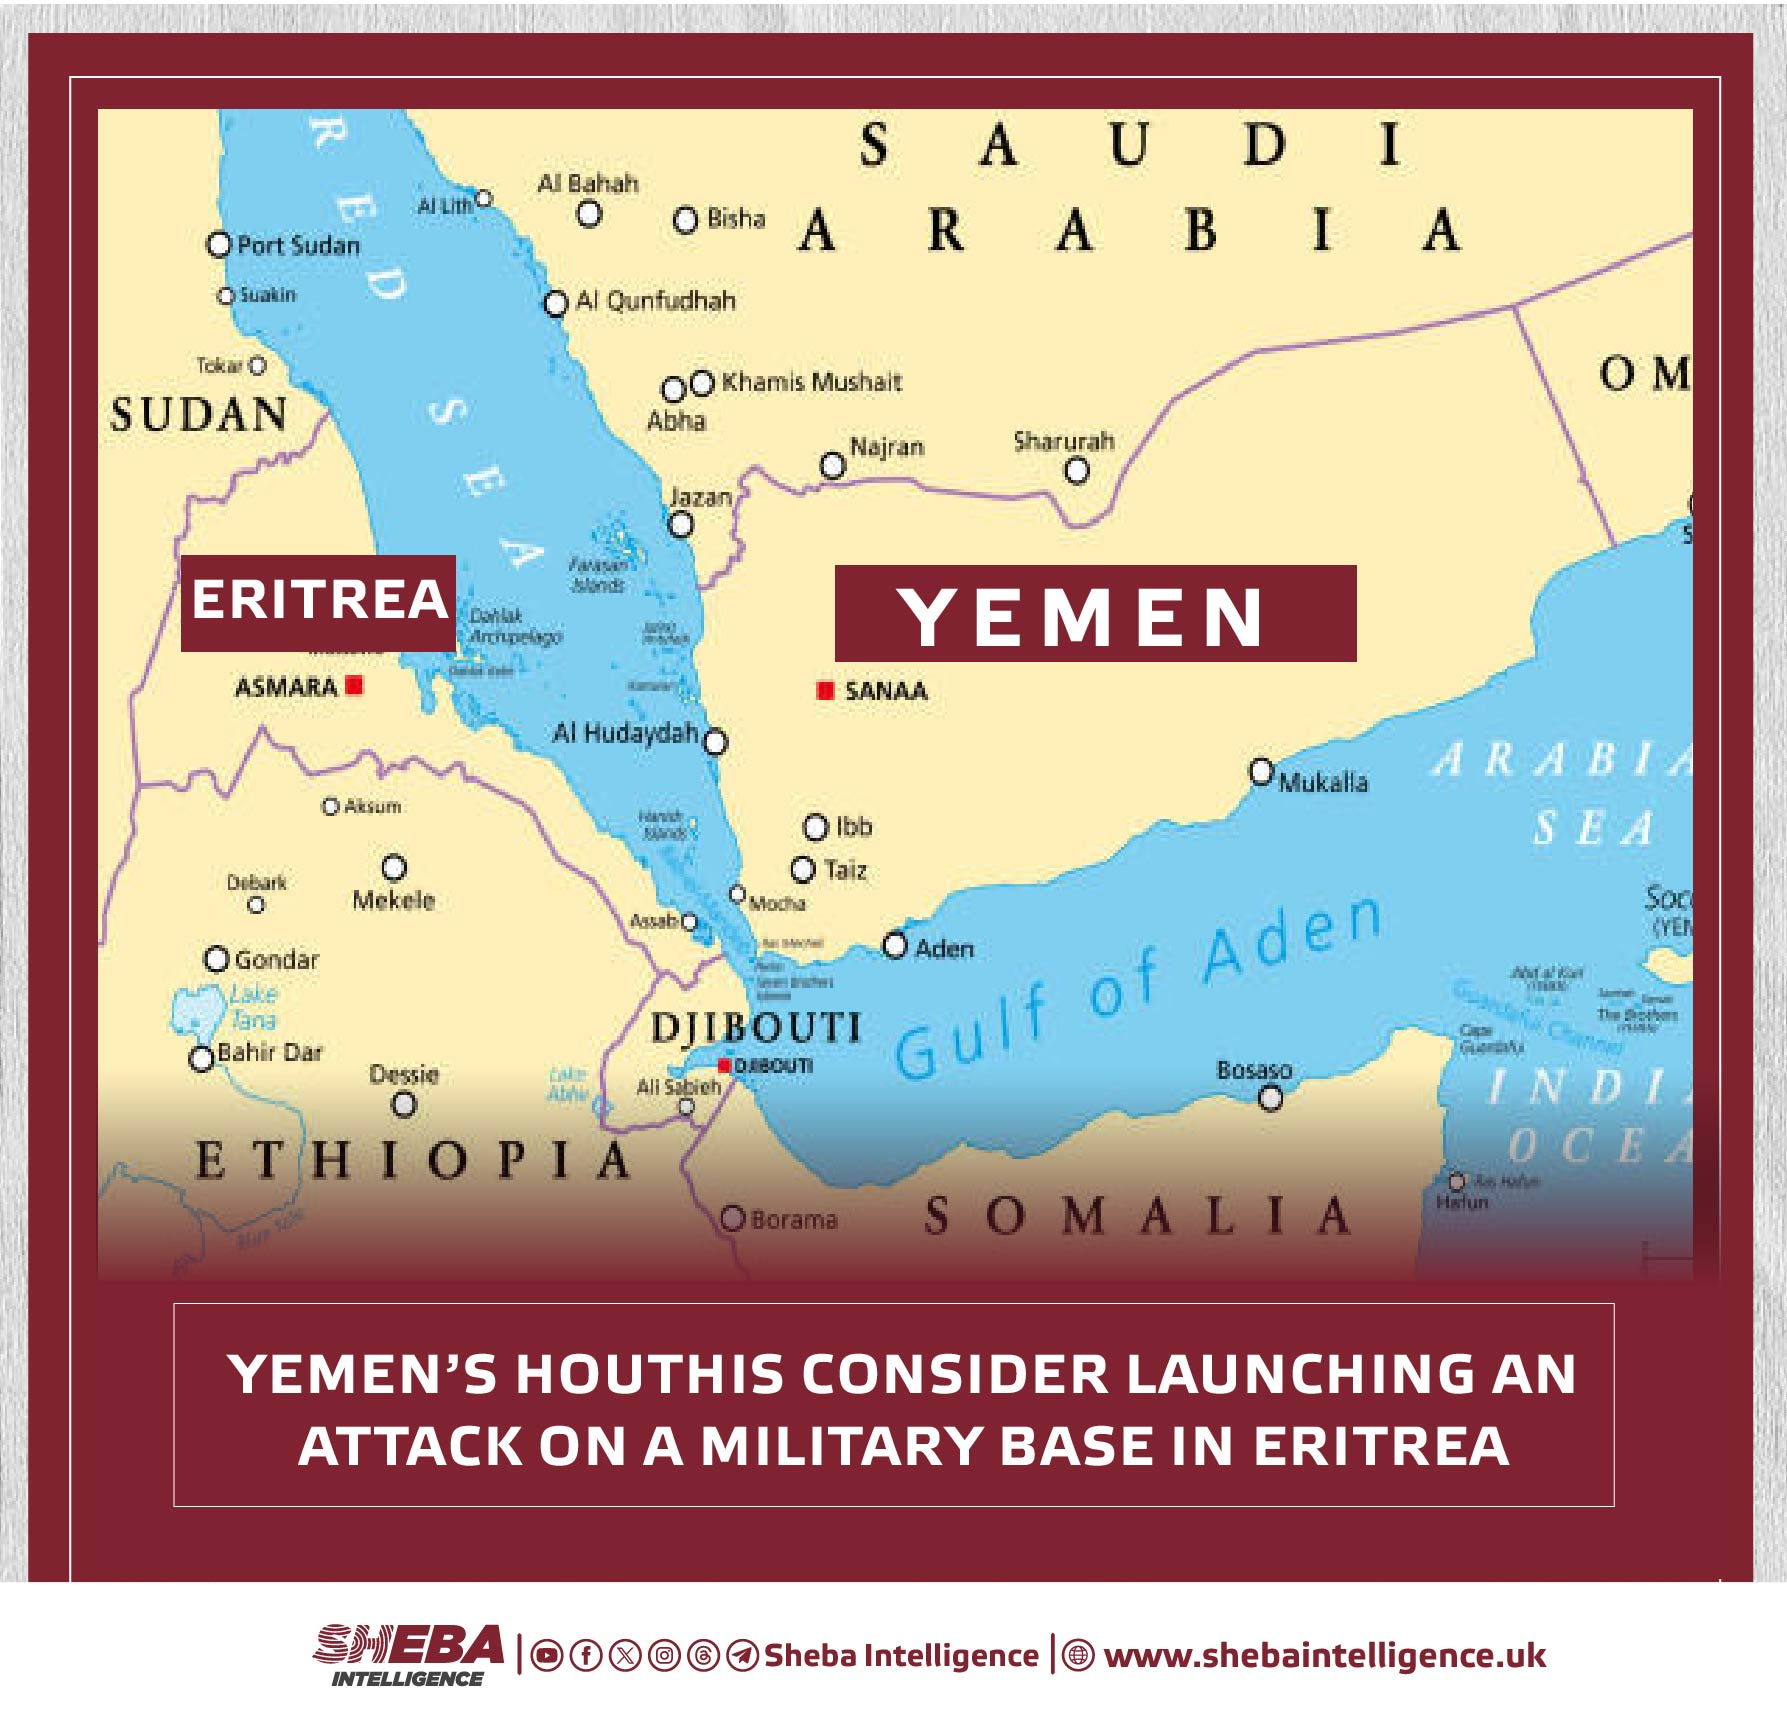 Yemen’s Houthis Consider Launching an Attack on a Military Base in Eritrea